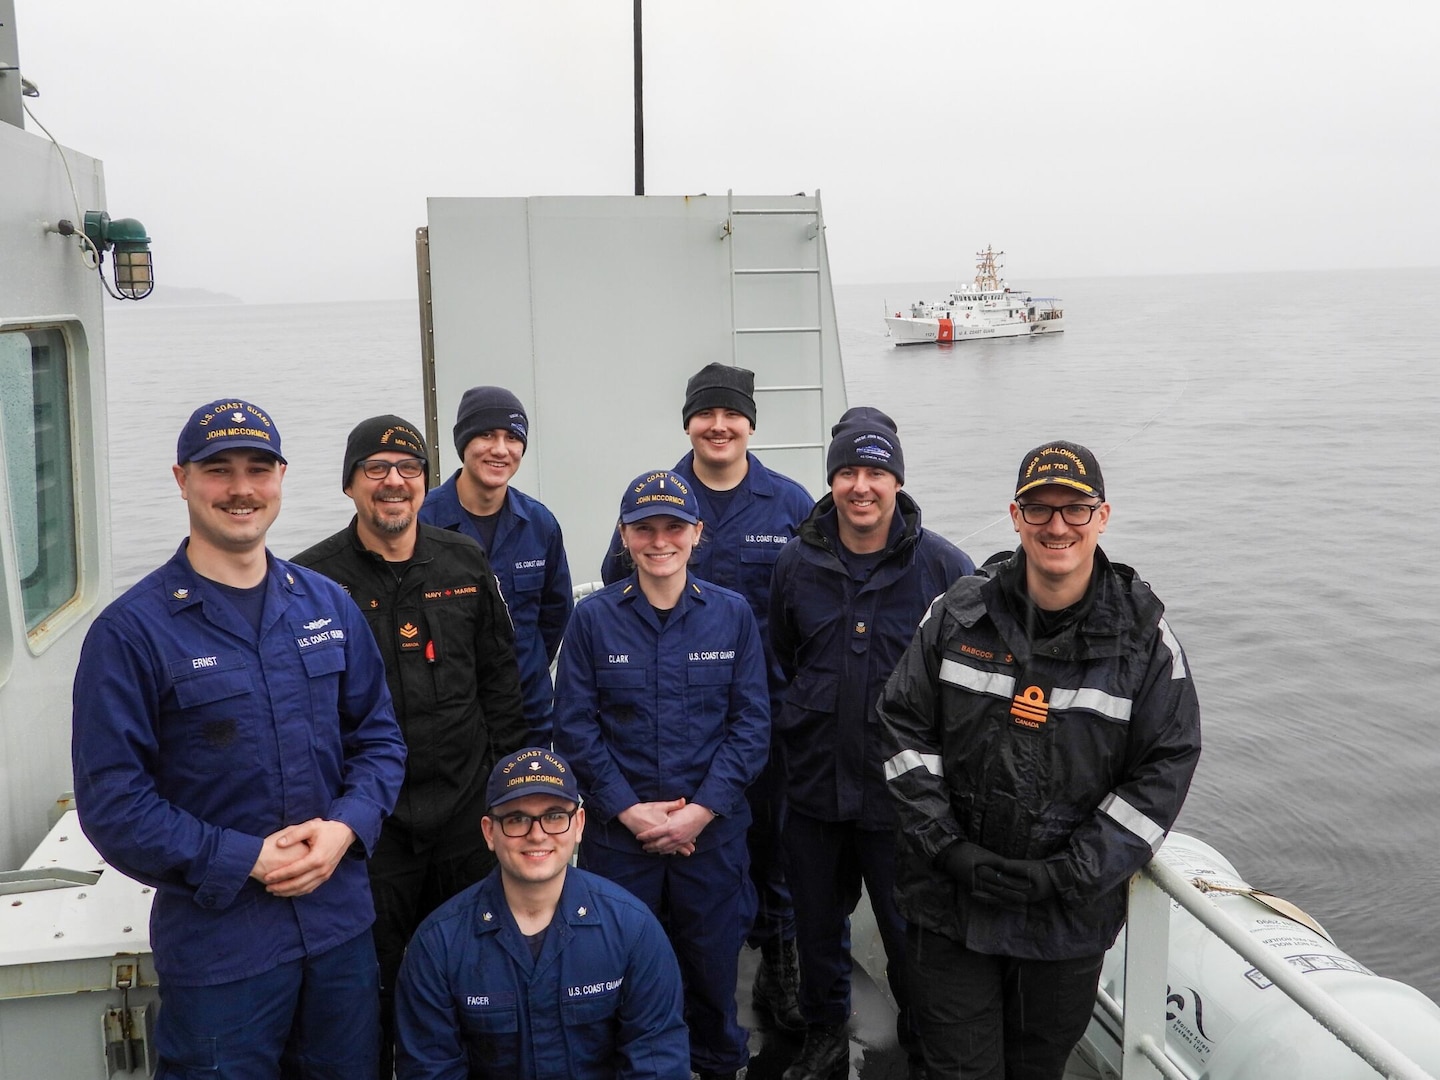 Crewmembers from the U.S. Coast Guard Cutter John McCormick pose for a photo with Royal Canadian Navy Vessel HMCS Yellowknife crewmembers off the coast of Ketchikan, Alaska, March 14, 2024. The objectives of the Coast Guard search and rescue program are to reduce loss of life, injury, and property damage in the maritime setting, minimize risks to responders, maximize resource utilization, and uphold global leadership in maritime search and readiness proficiency and impact. U.S. Coast Guard courtesy photo.